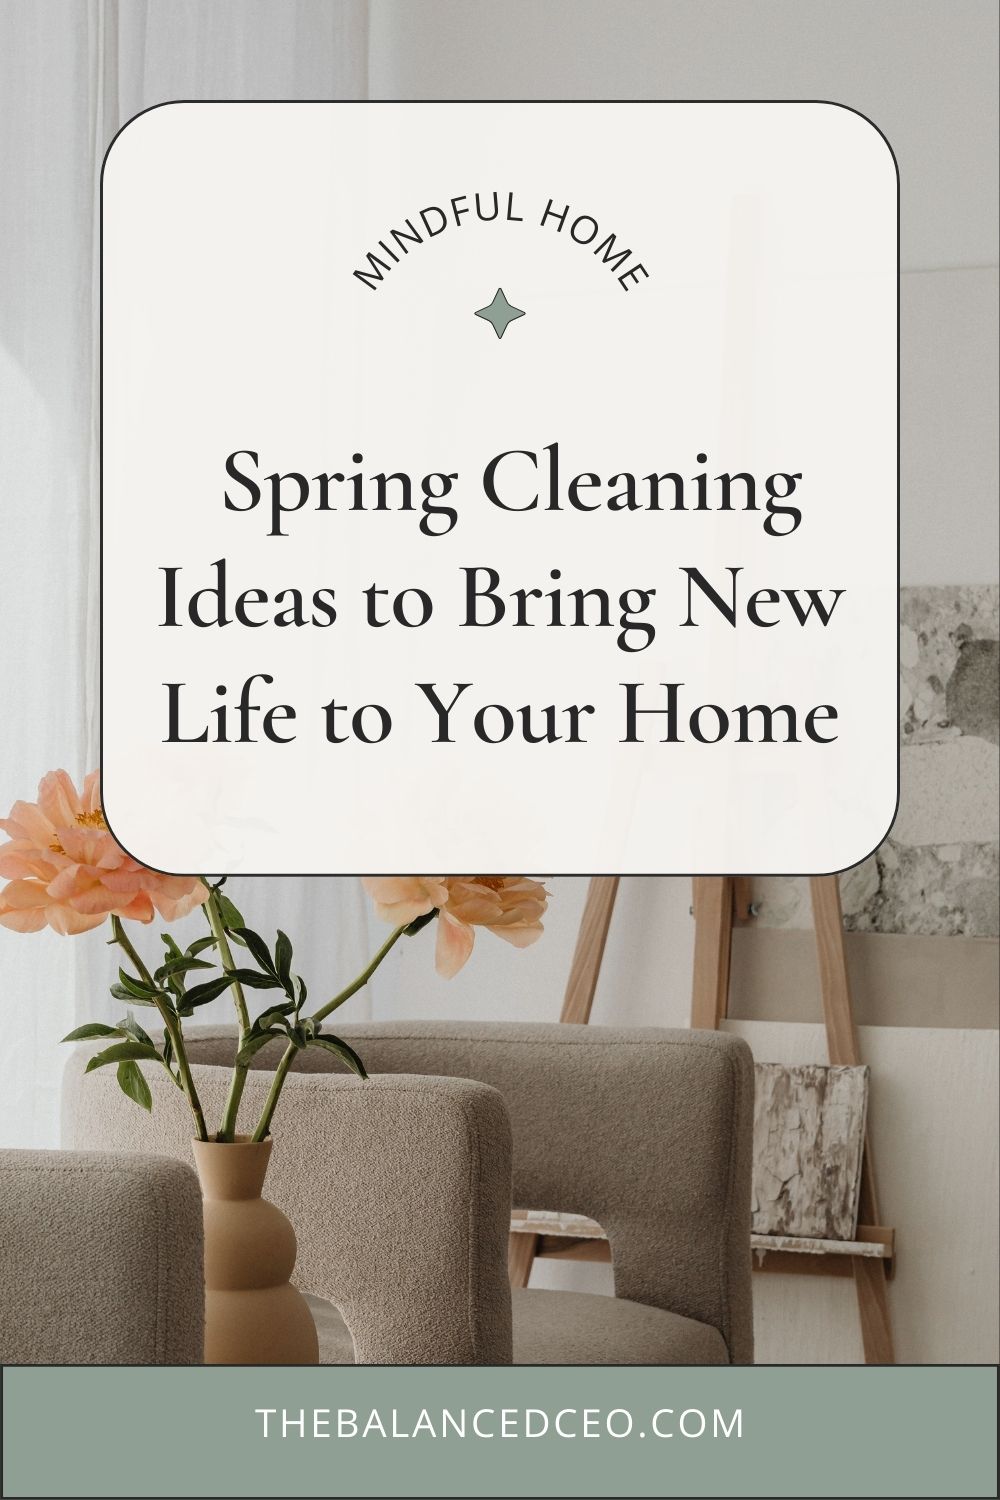 Spring Cleaning Ideas to Bring New Life to Your Home